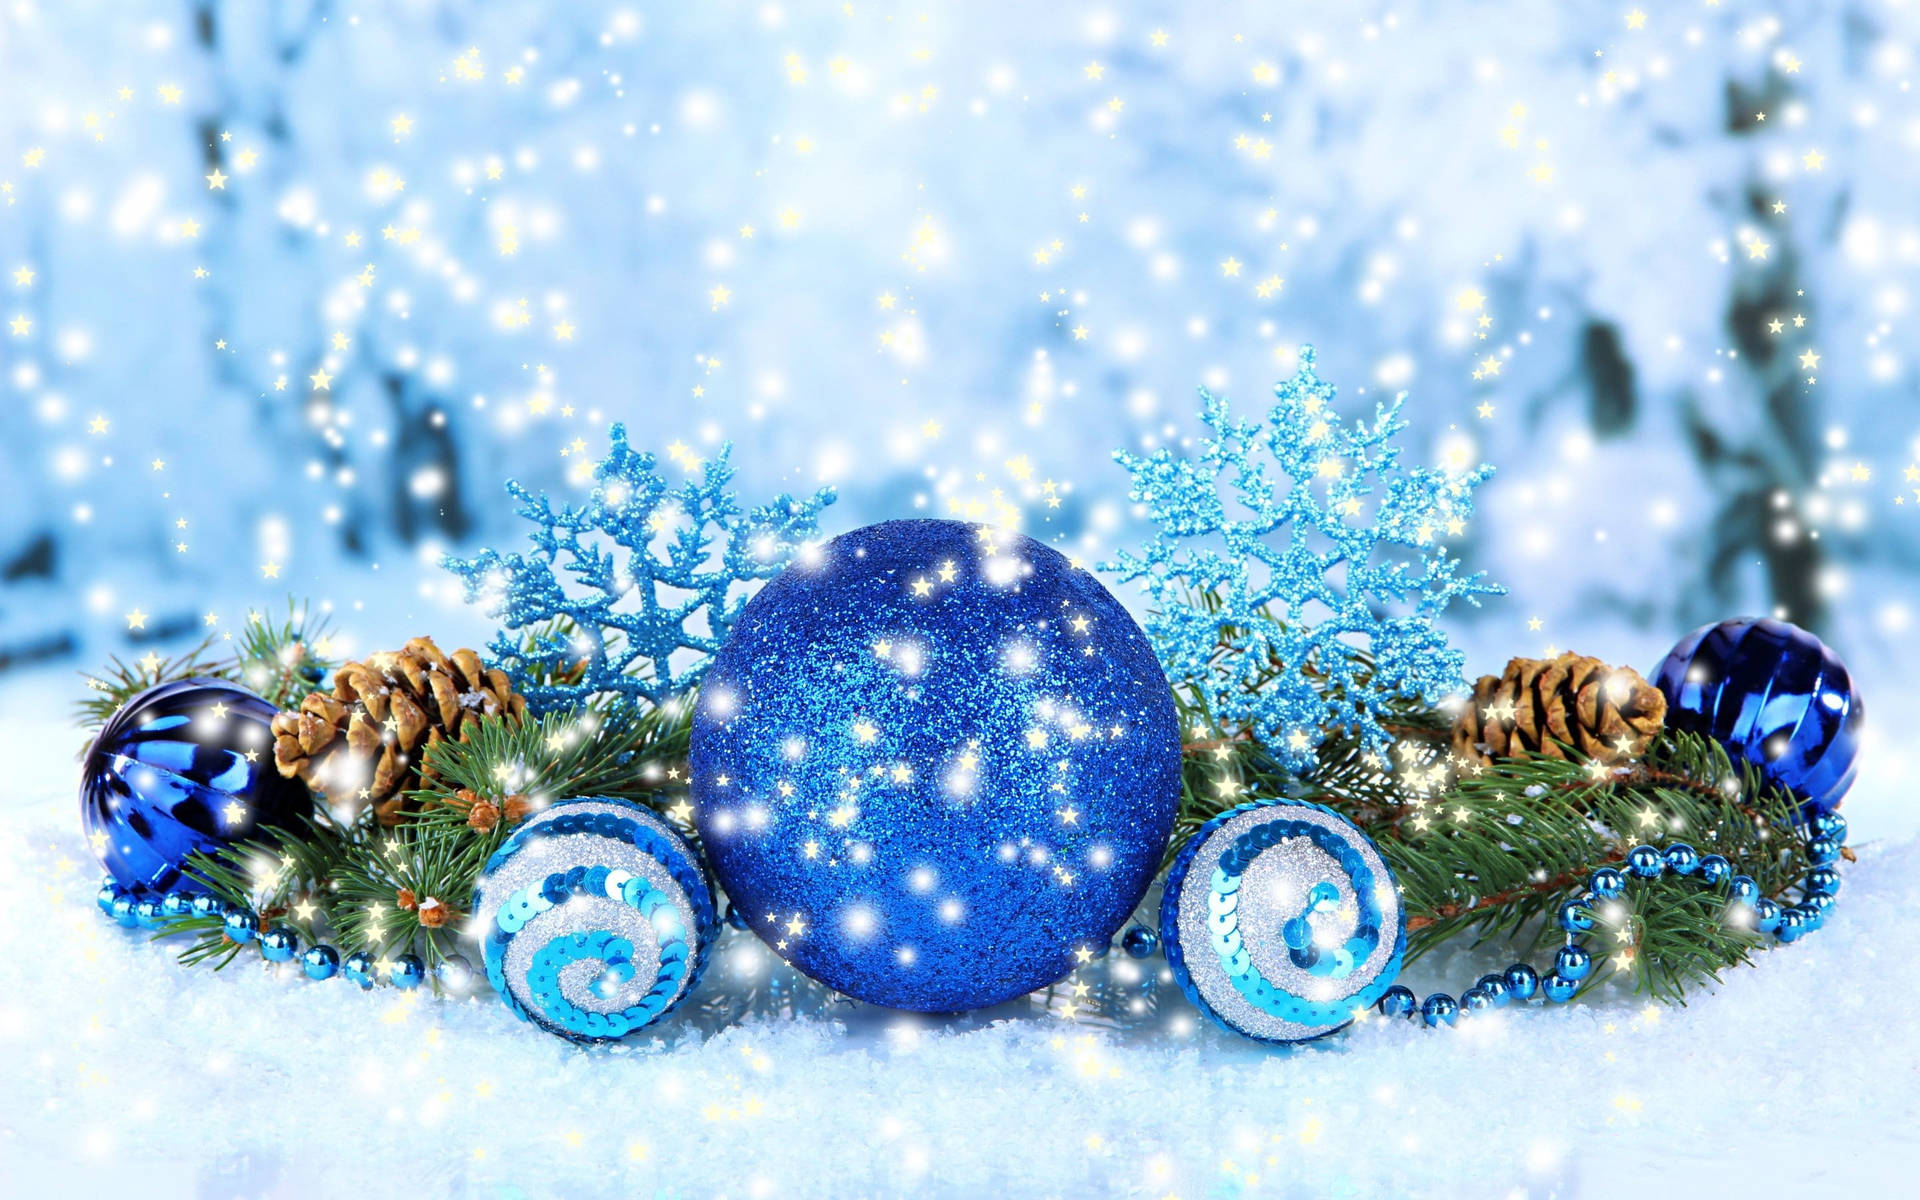 Blue Christmas Balls With Snowflakes